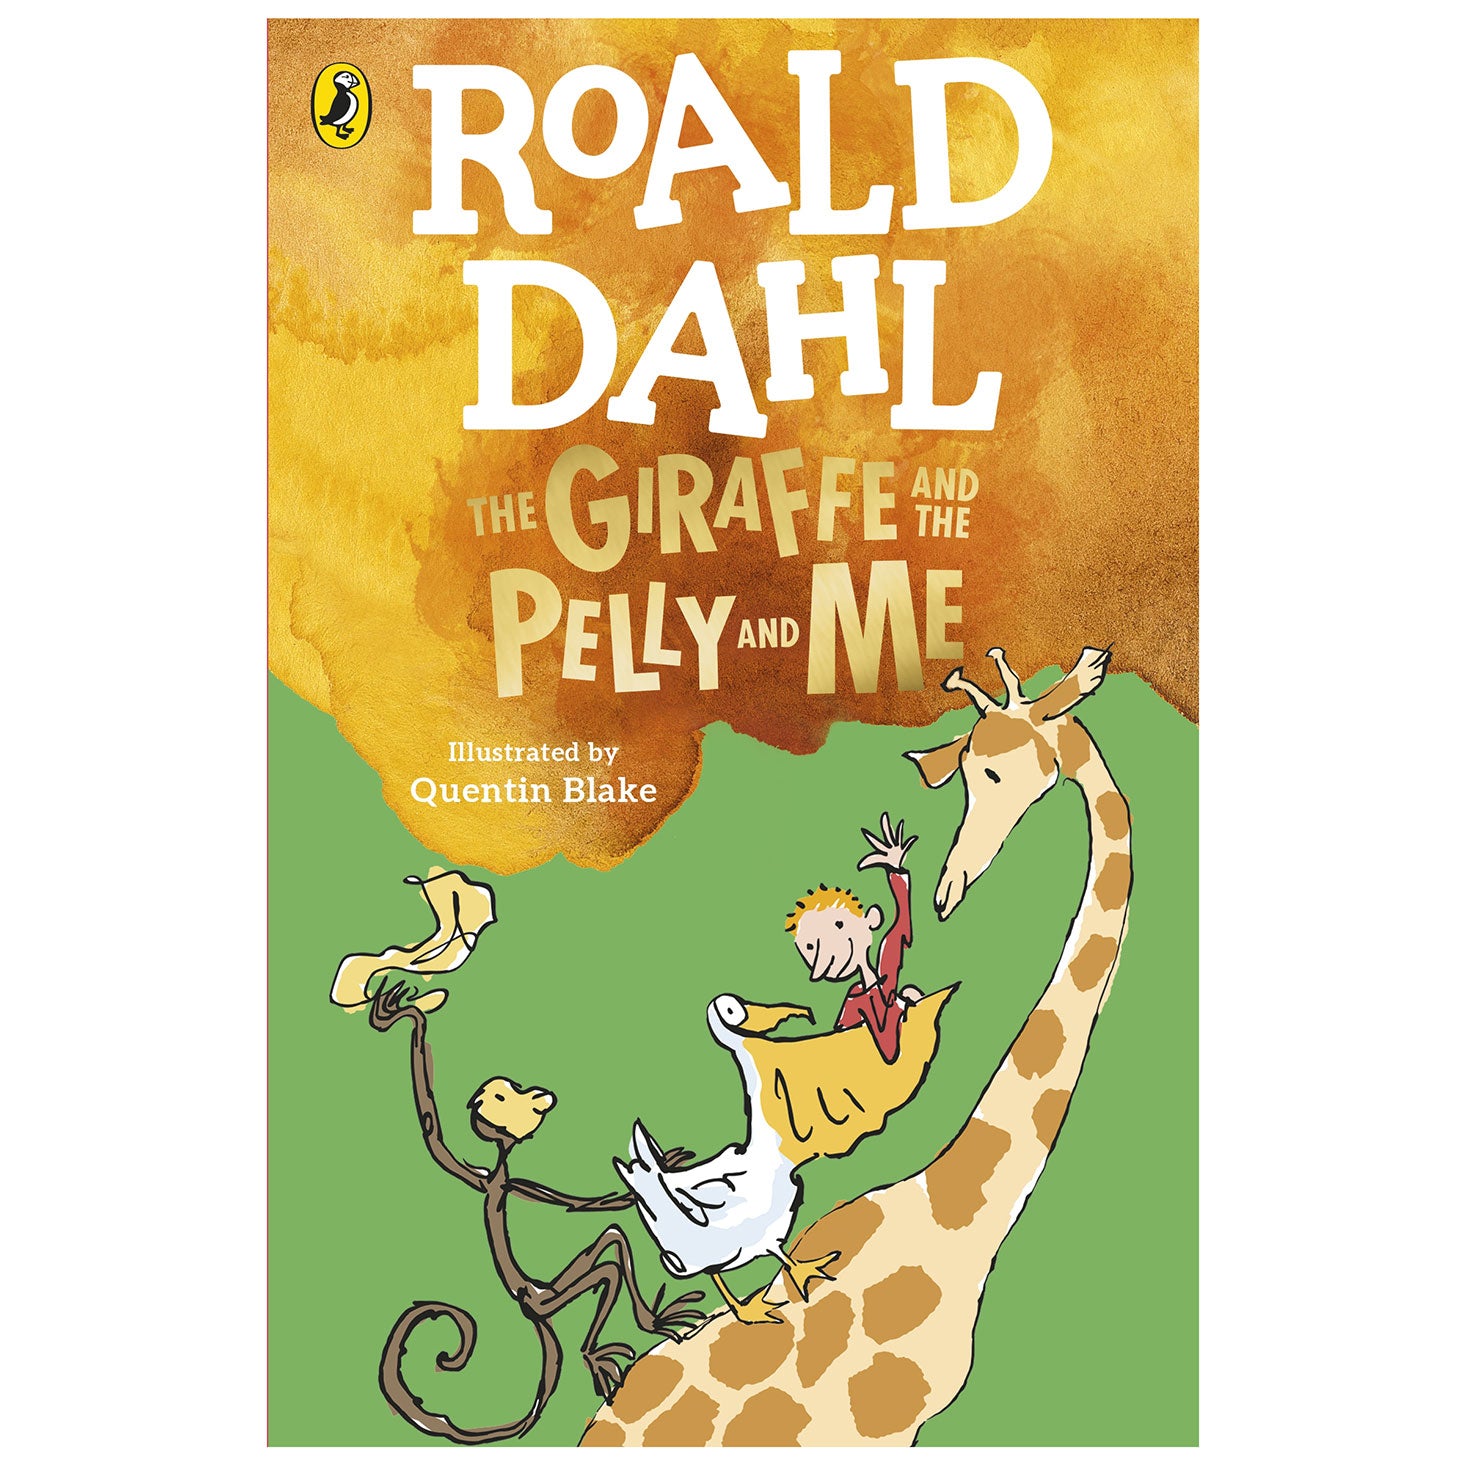 Roald Dahl's The Giraffe and the Pelly and Me with illustrations by Quentin Blake